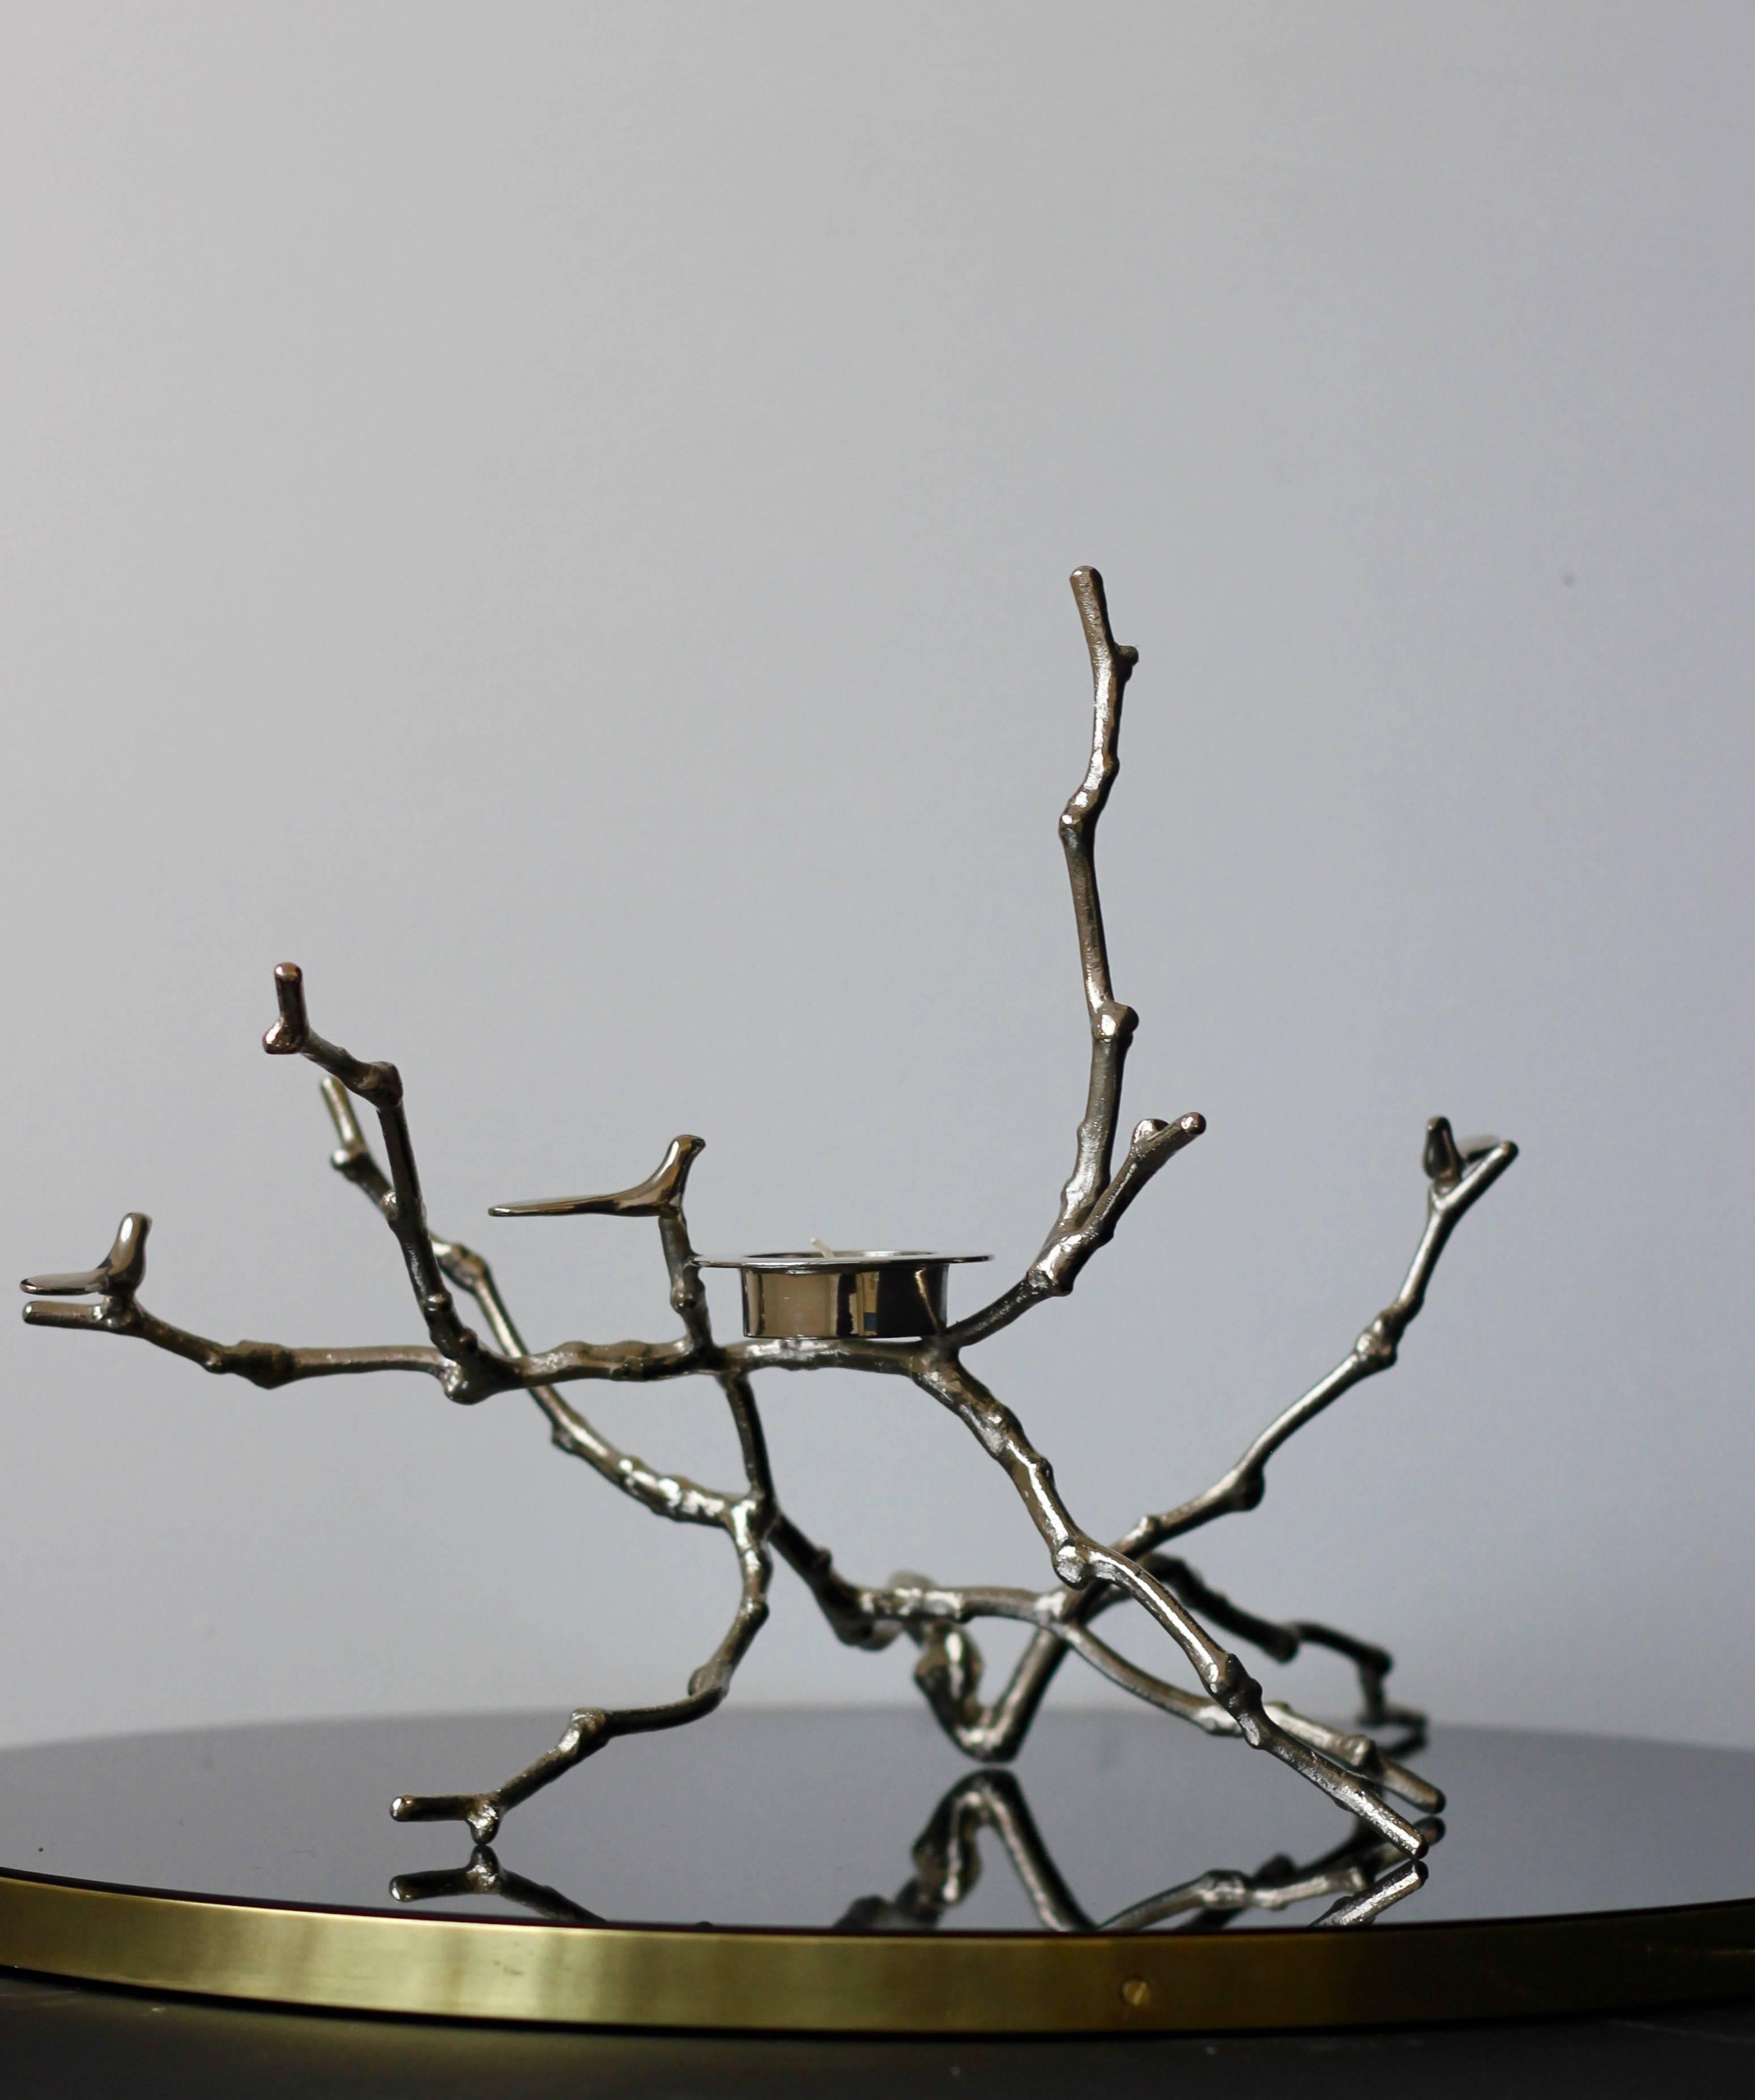 Original, unique and cast in brass with a nickel-plated finish, creating sumptuous and unusual decorative elements for beautiful homes.

Each of these splendid Magnolia twig T-light holders is handmade individually with incredible detail. Cast using